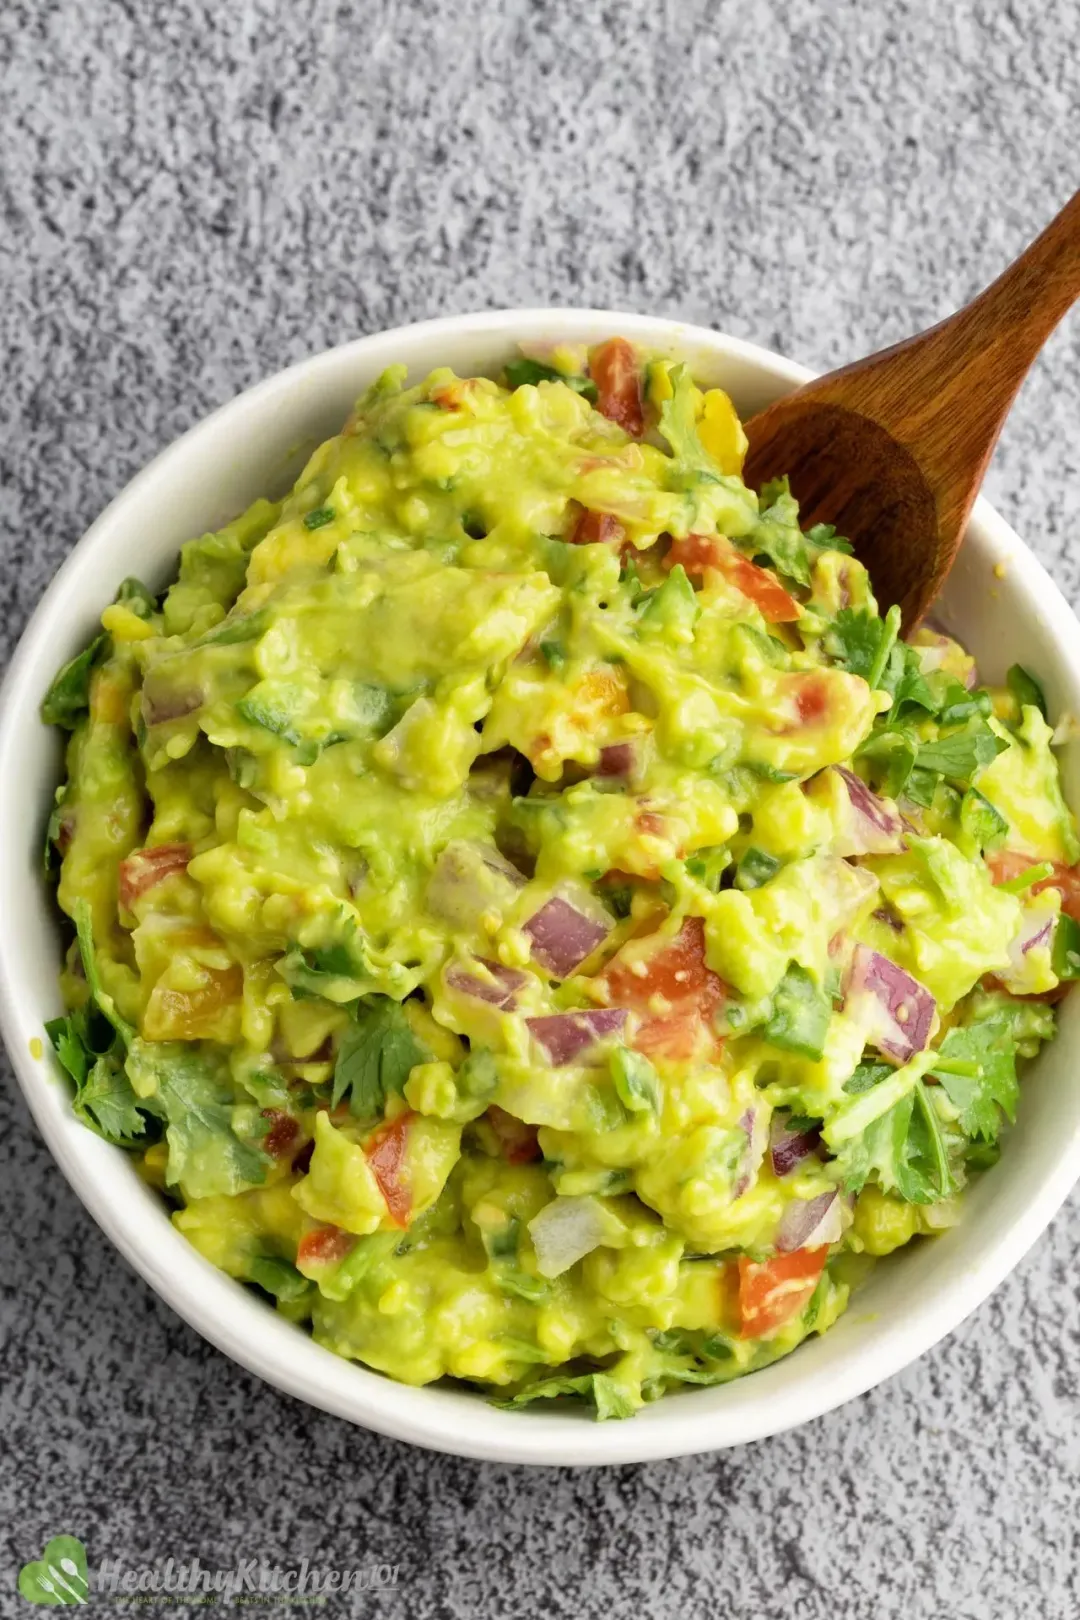 A bowl of guacamole with a wooden spoon